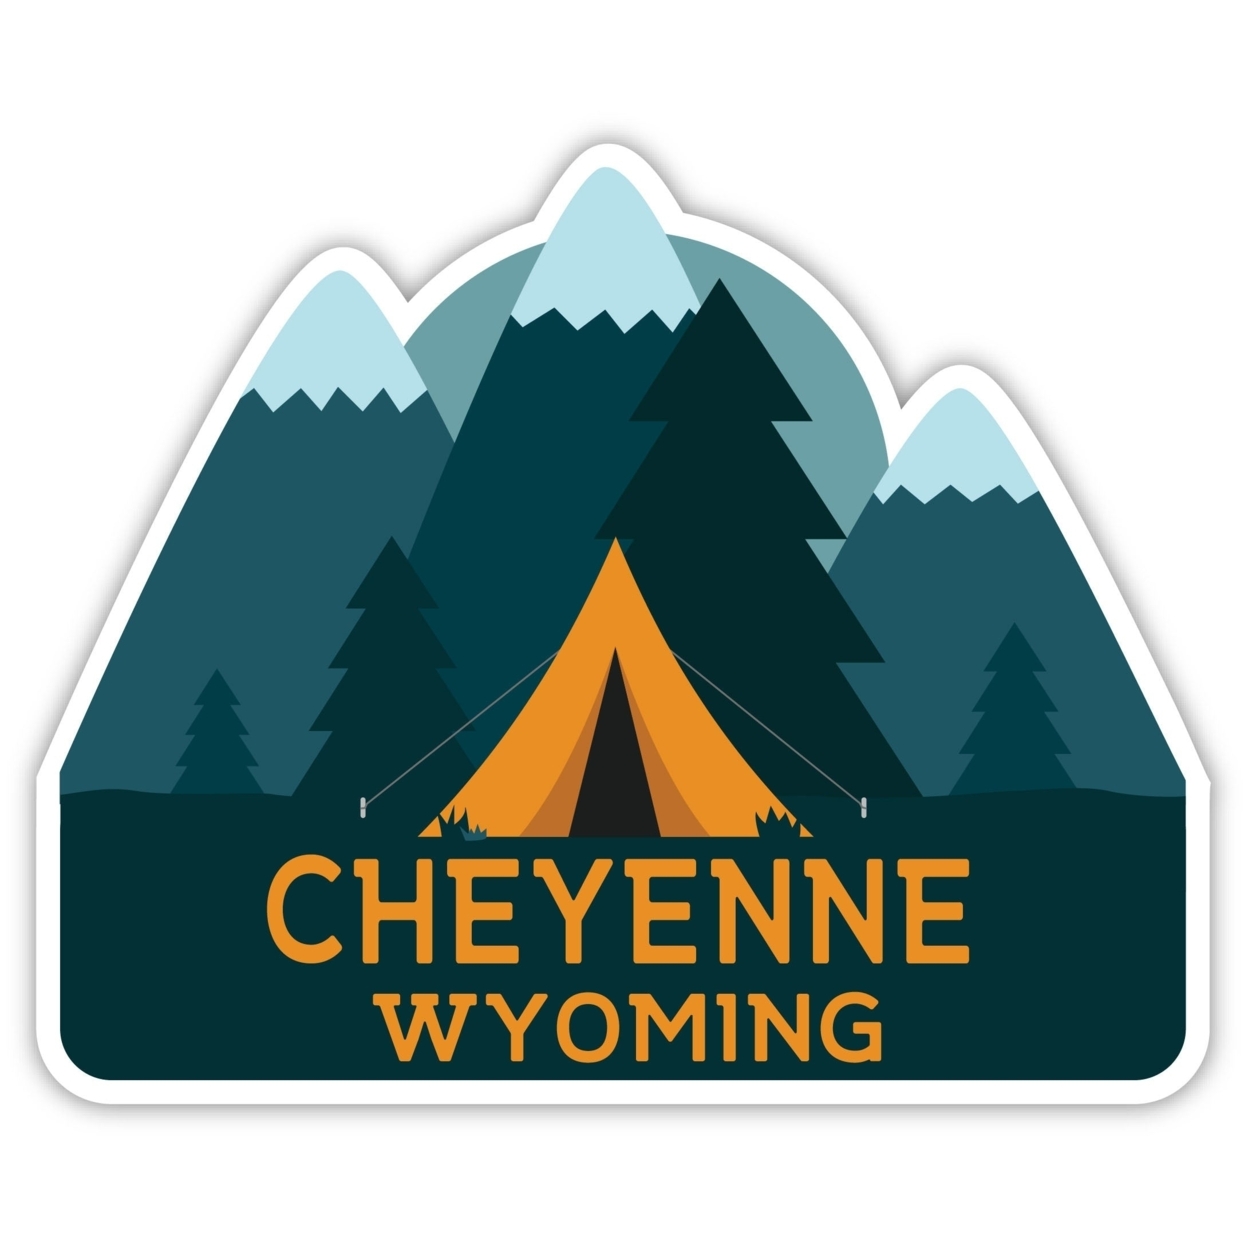 Cheyenne Wyoming Souvenir Decorative Stickers (Choose Theme And Size) - 4-Pack, 6-Inch, Tent